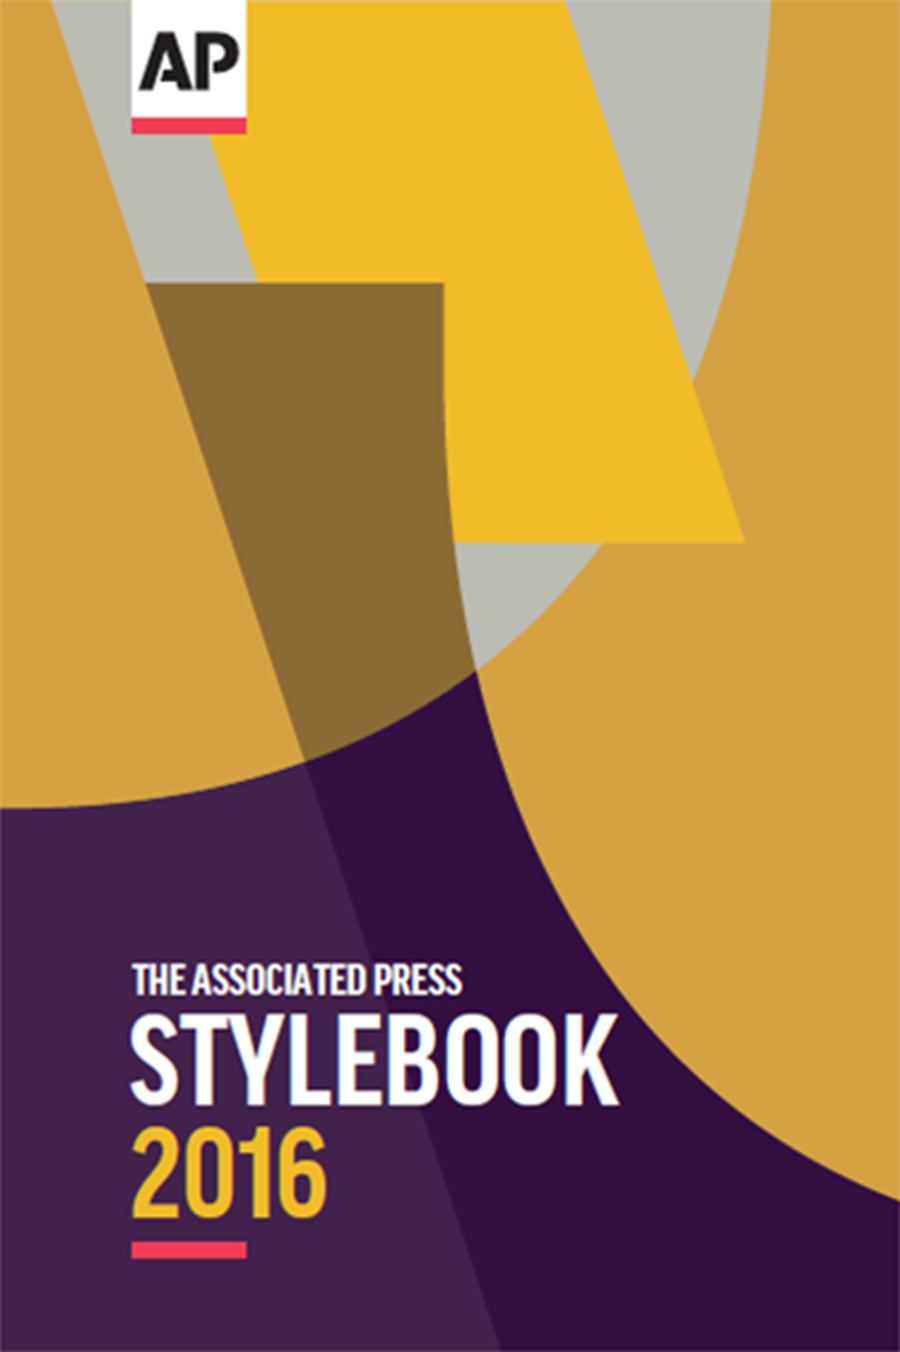  The 2016 AP Styleguide